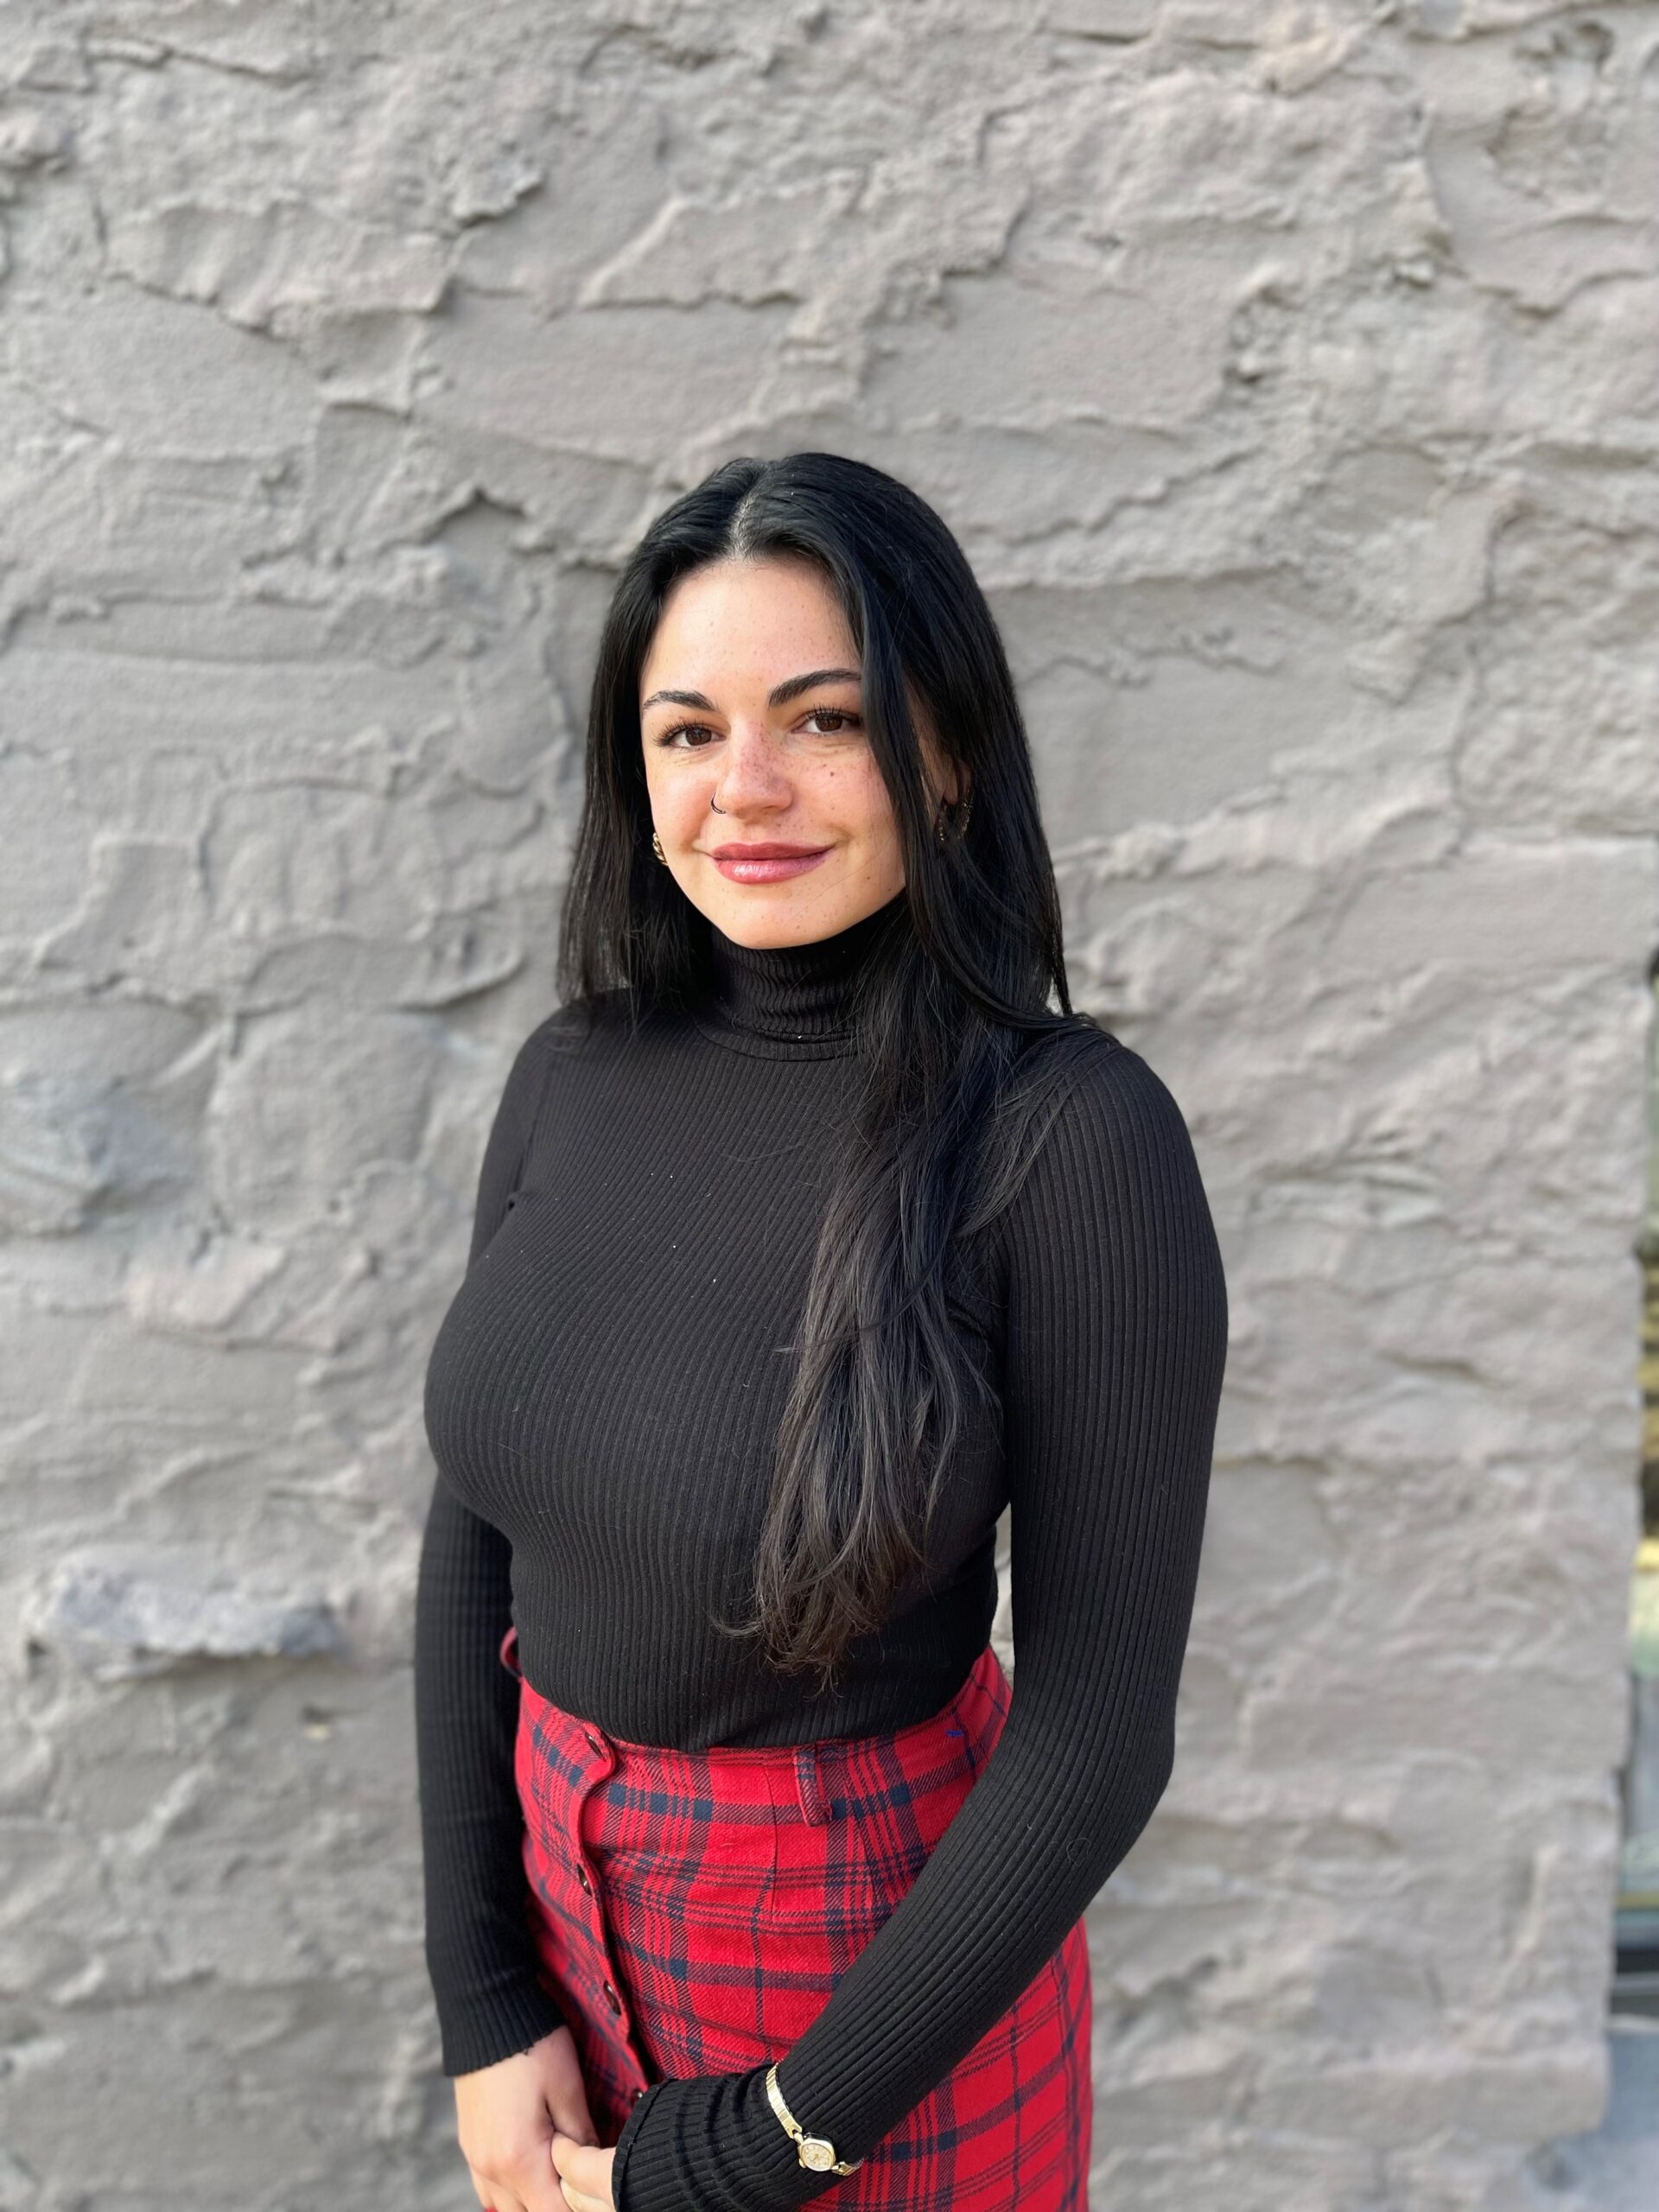 A women in black turtle neck and red plaid pants with long black hair poses against a grey background.